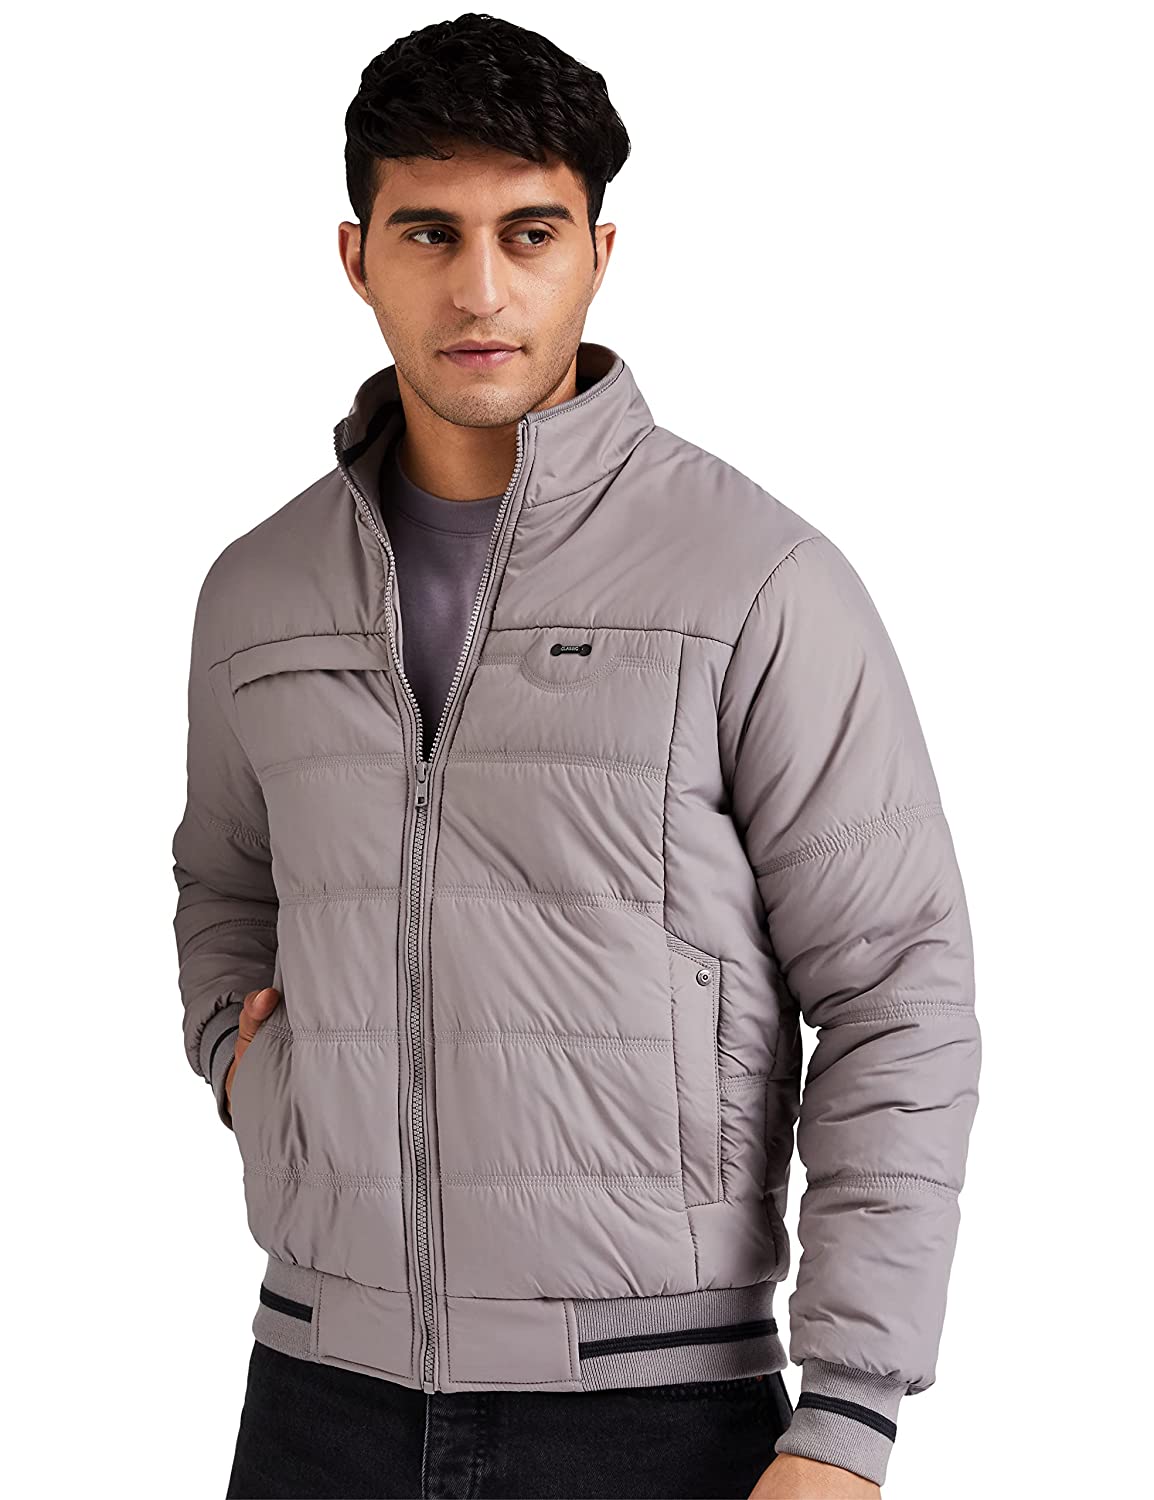 Qube-By-Fort-Collins-Men's-Jacket